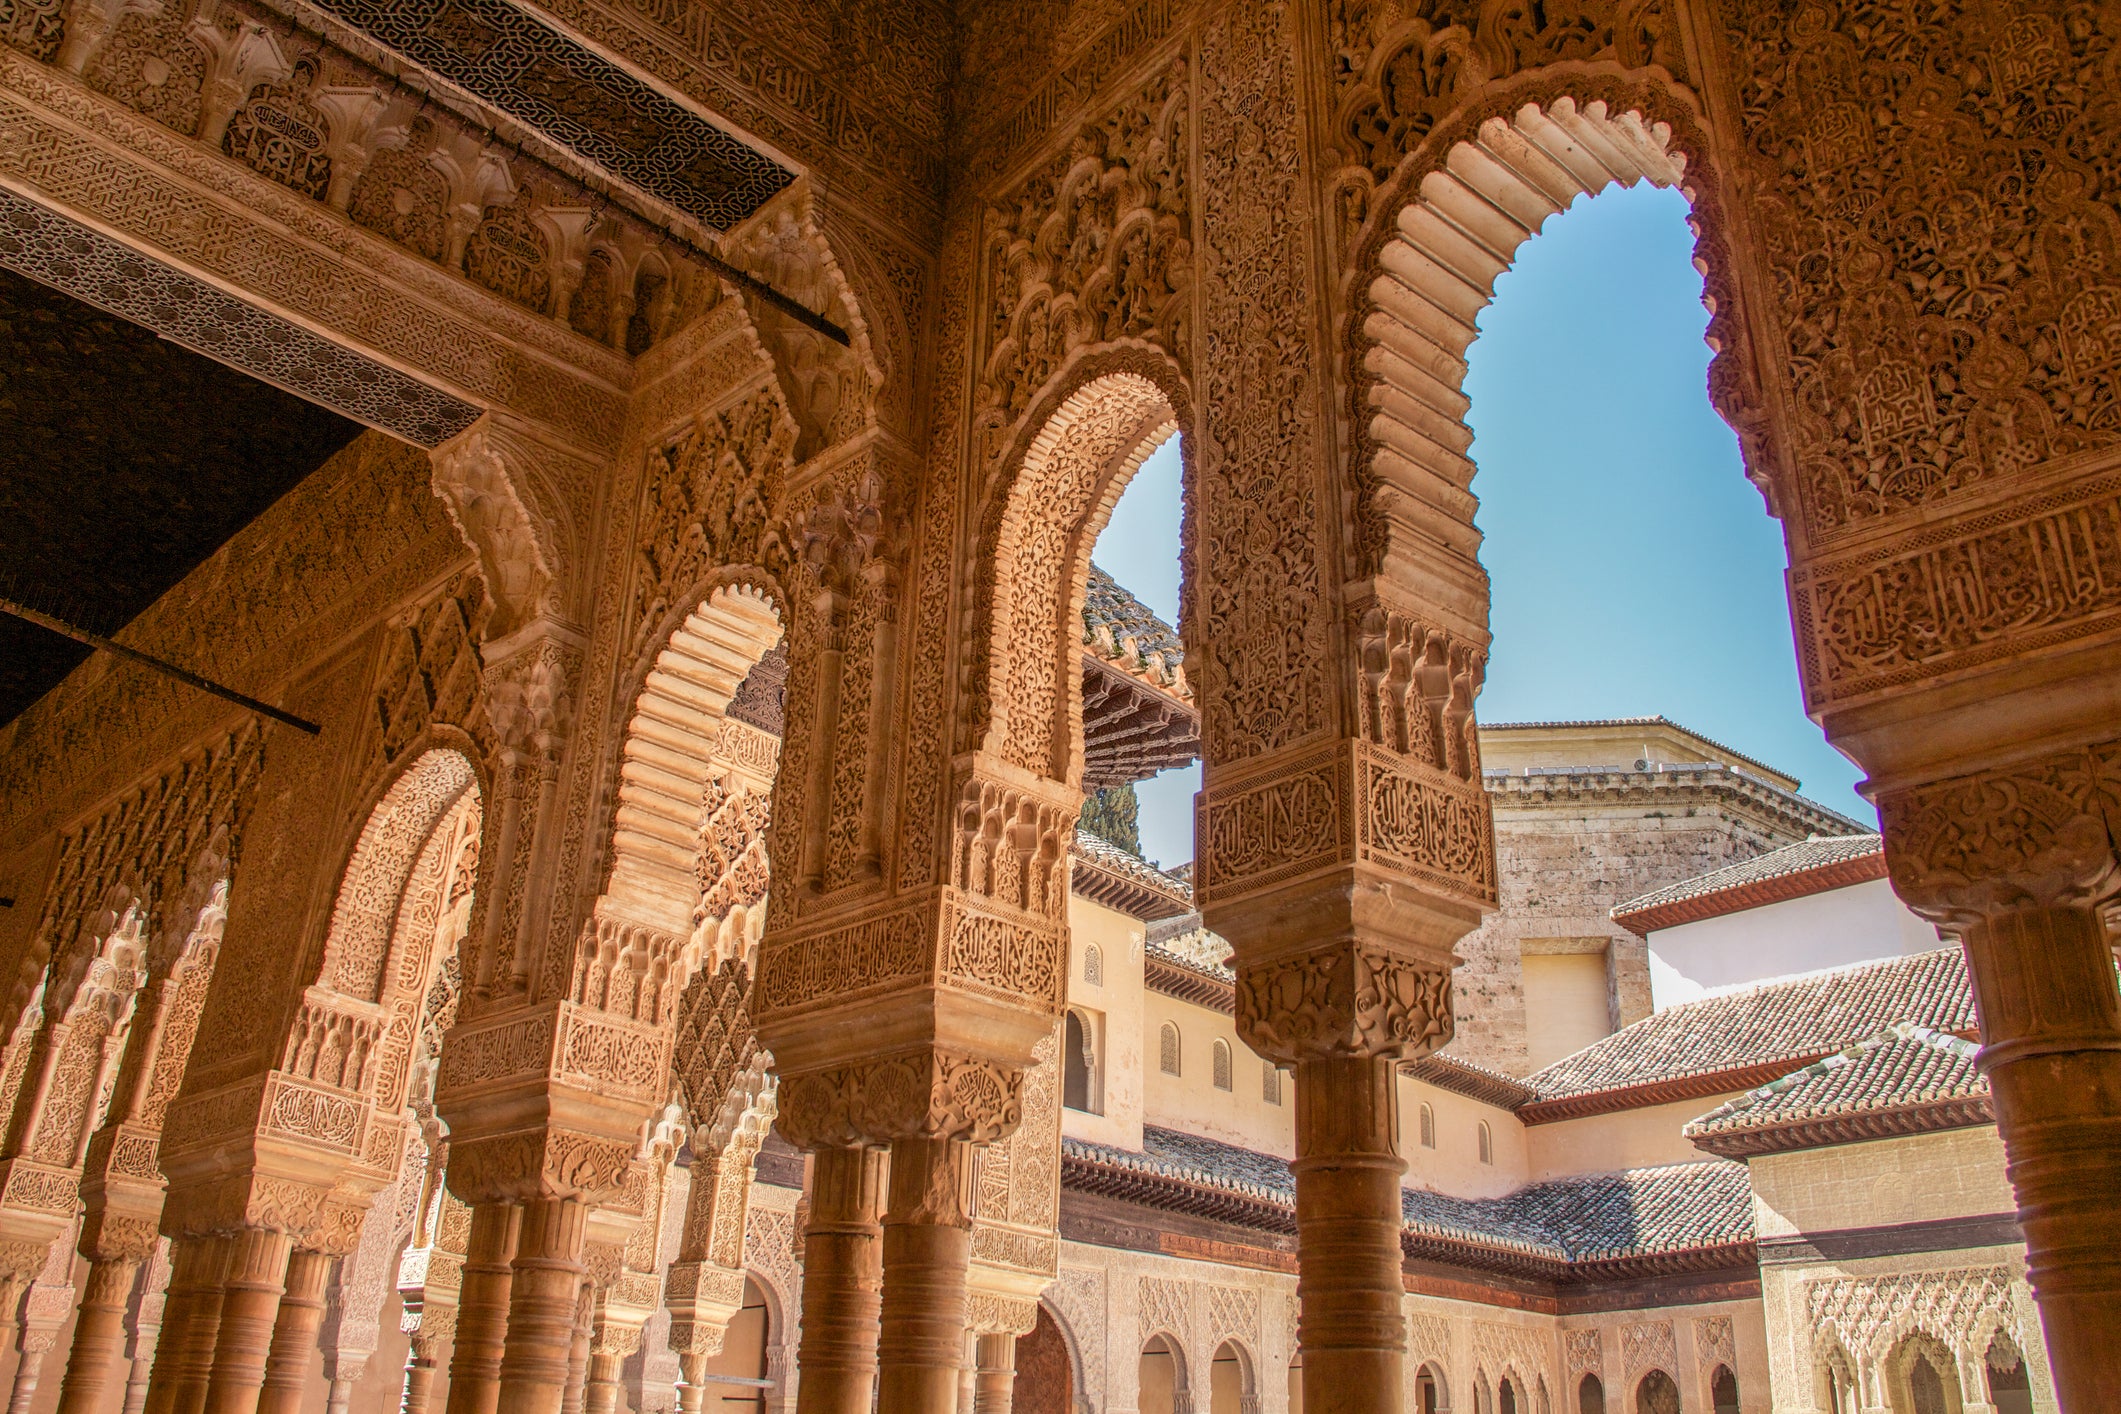 The Alhambra is one of the best-preserved examples of Islamic architecture